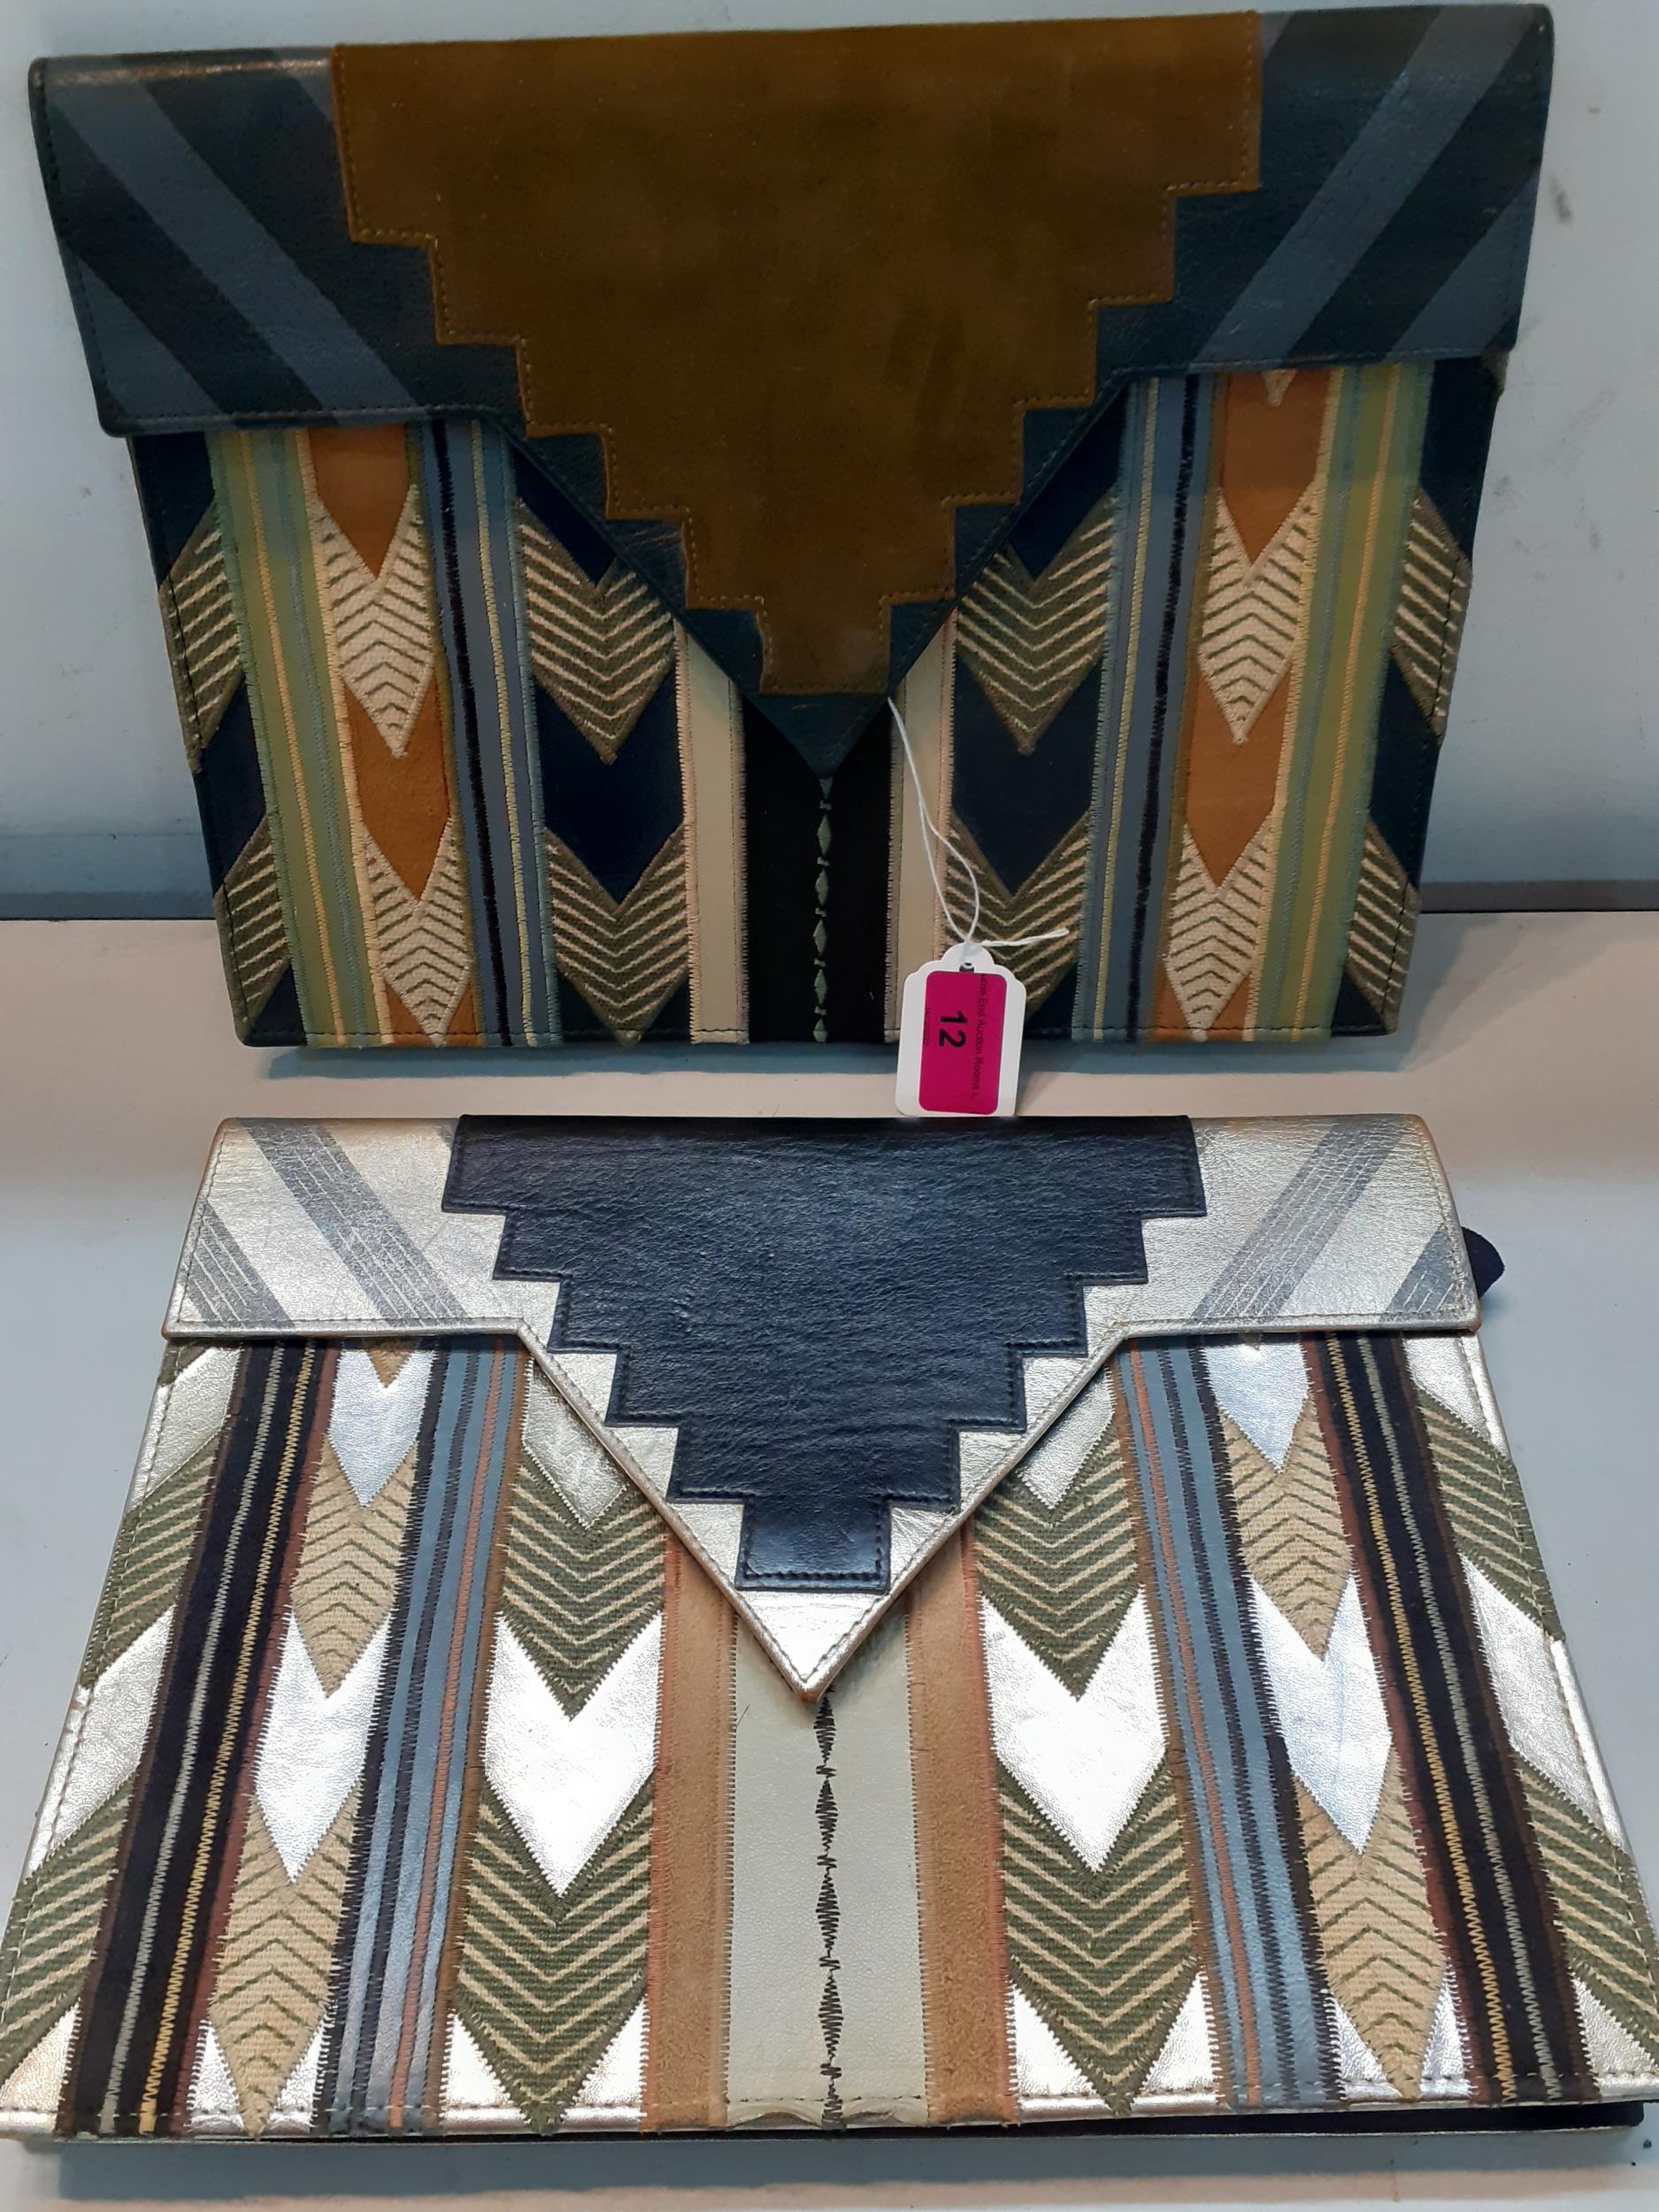 Two Retro limited edition Californian chevron patterned leather oversized clutch bags made in GB for